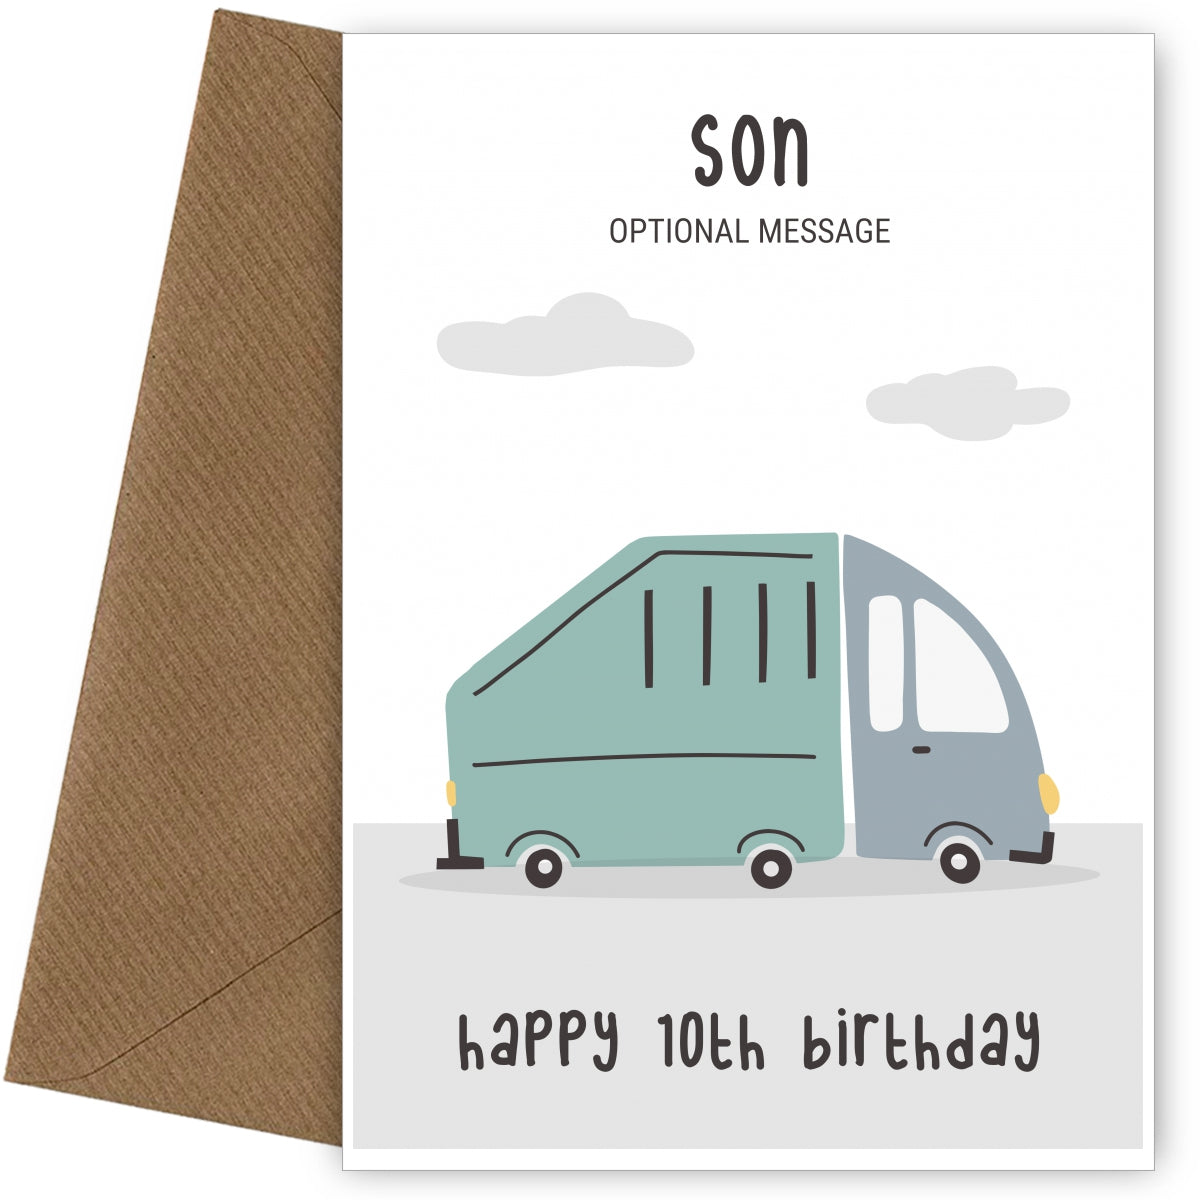 Fun Vehicles 10th Birthday Card for Son - Garbage Truck